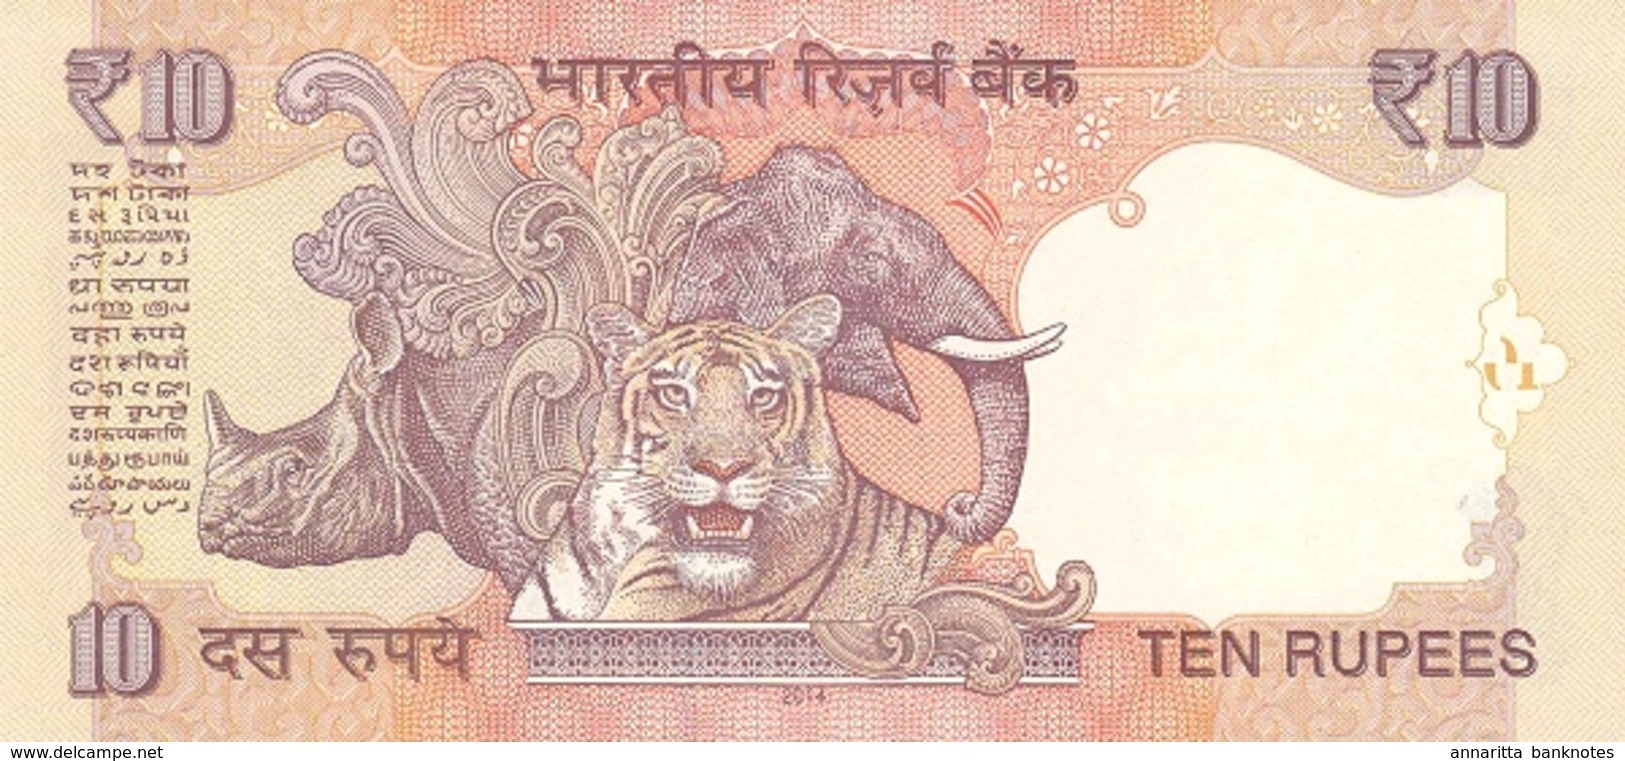 INDE 10 RUPEES 2014 P-102 NEUF SIGN. RAJAN. LETTRE DE PLAQUE A [IN286e] - India